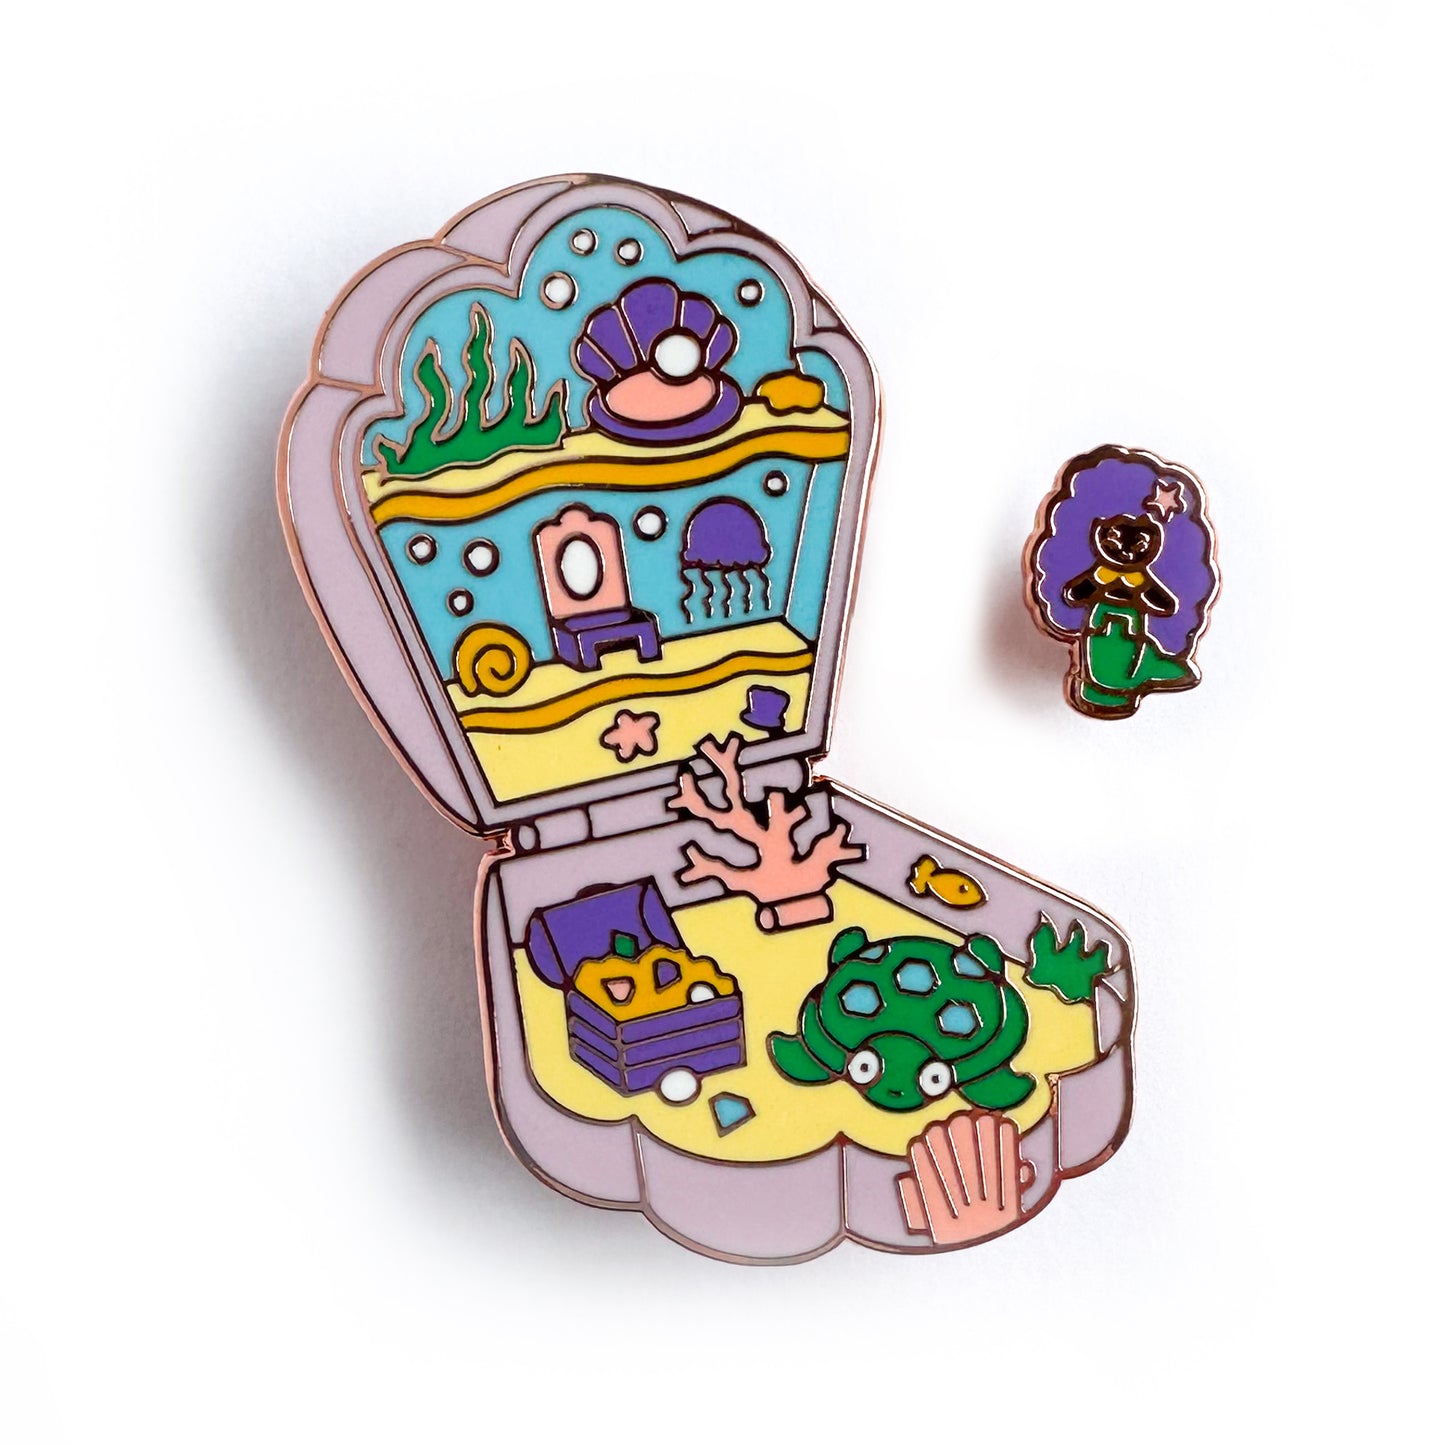 An enamel pin in the shape of a Polly Pocket compact shell with a mermaid mini pin. The shell compact is the mermaid's home with a jellyfish, coral, treasure chest, and a turtle.